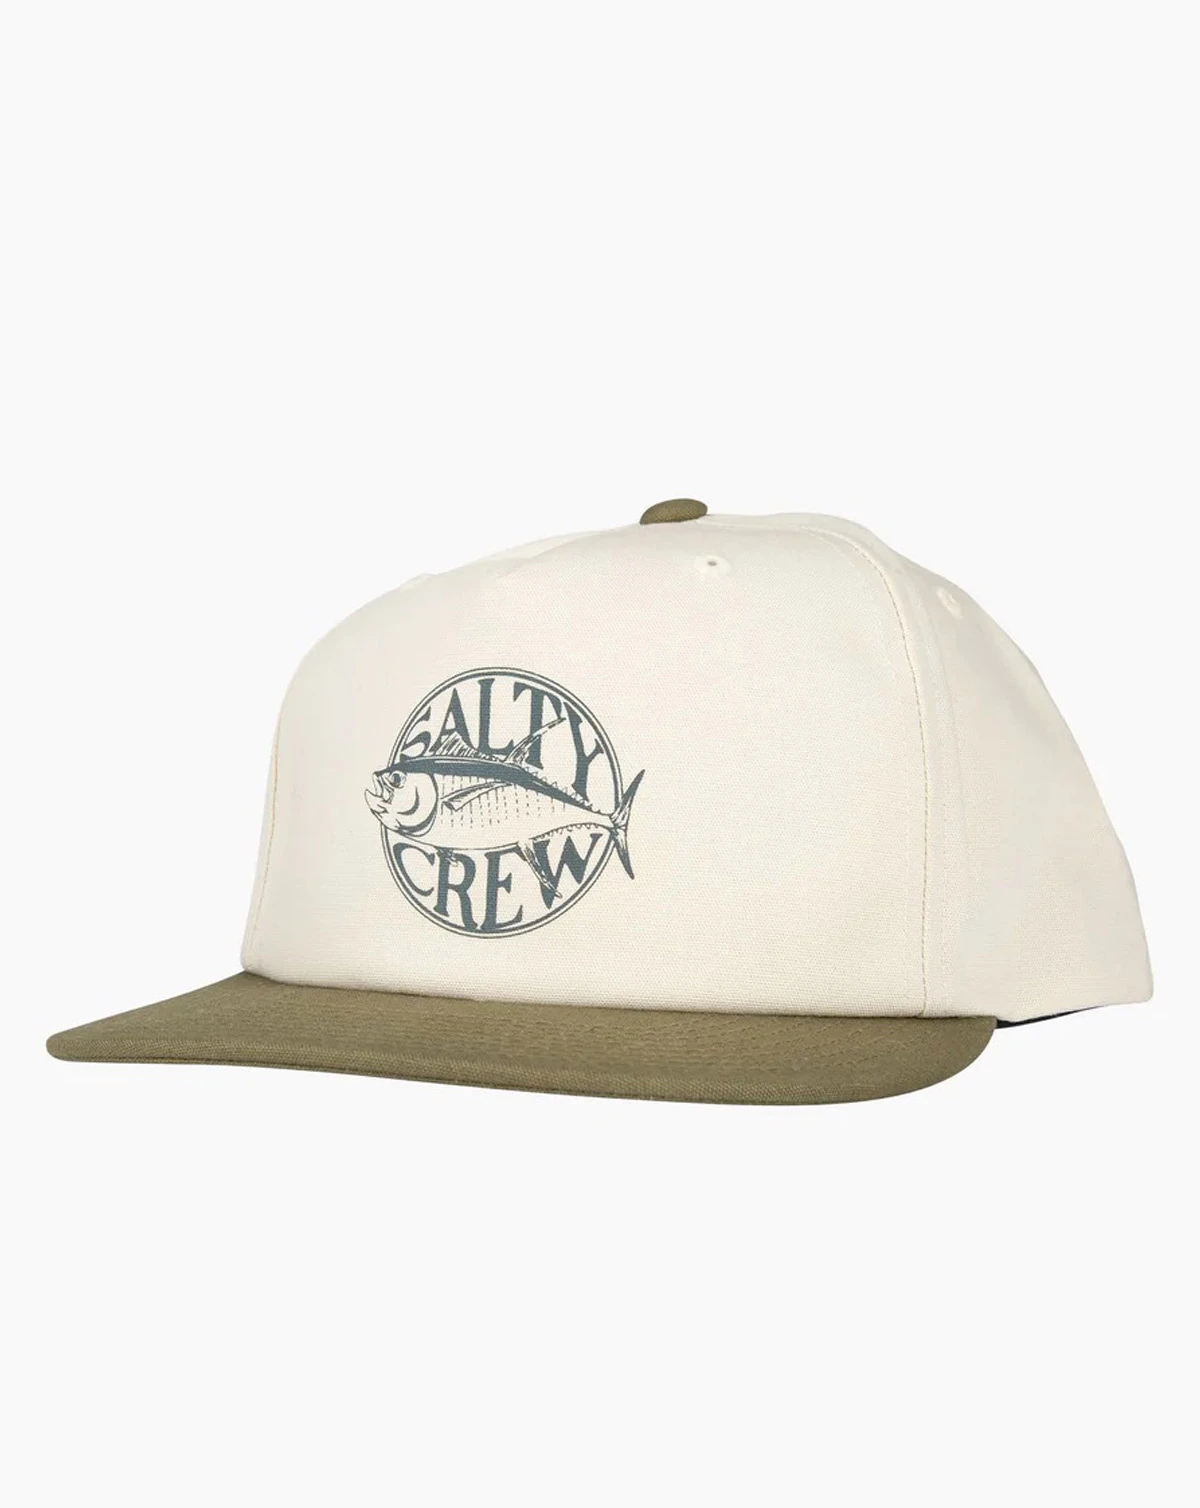 Army caps online – Army military caps & Star | Army Buy